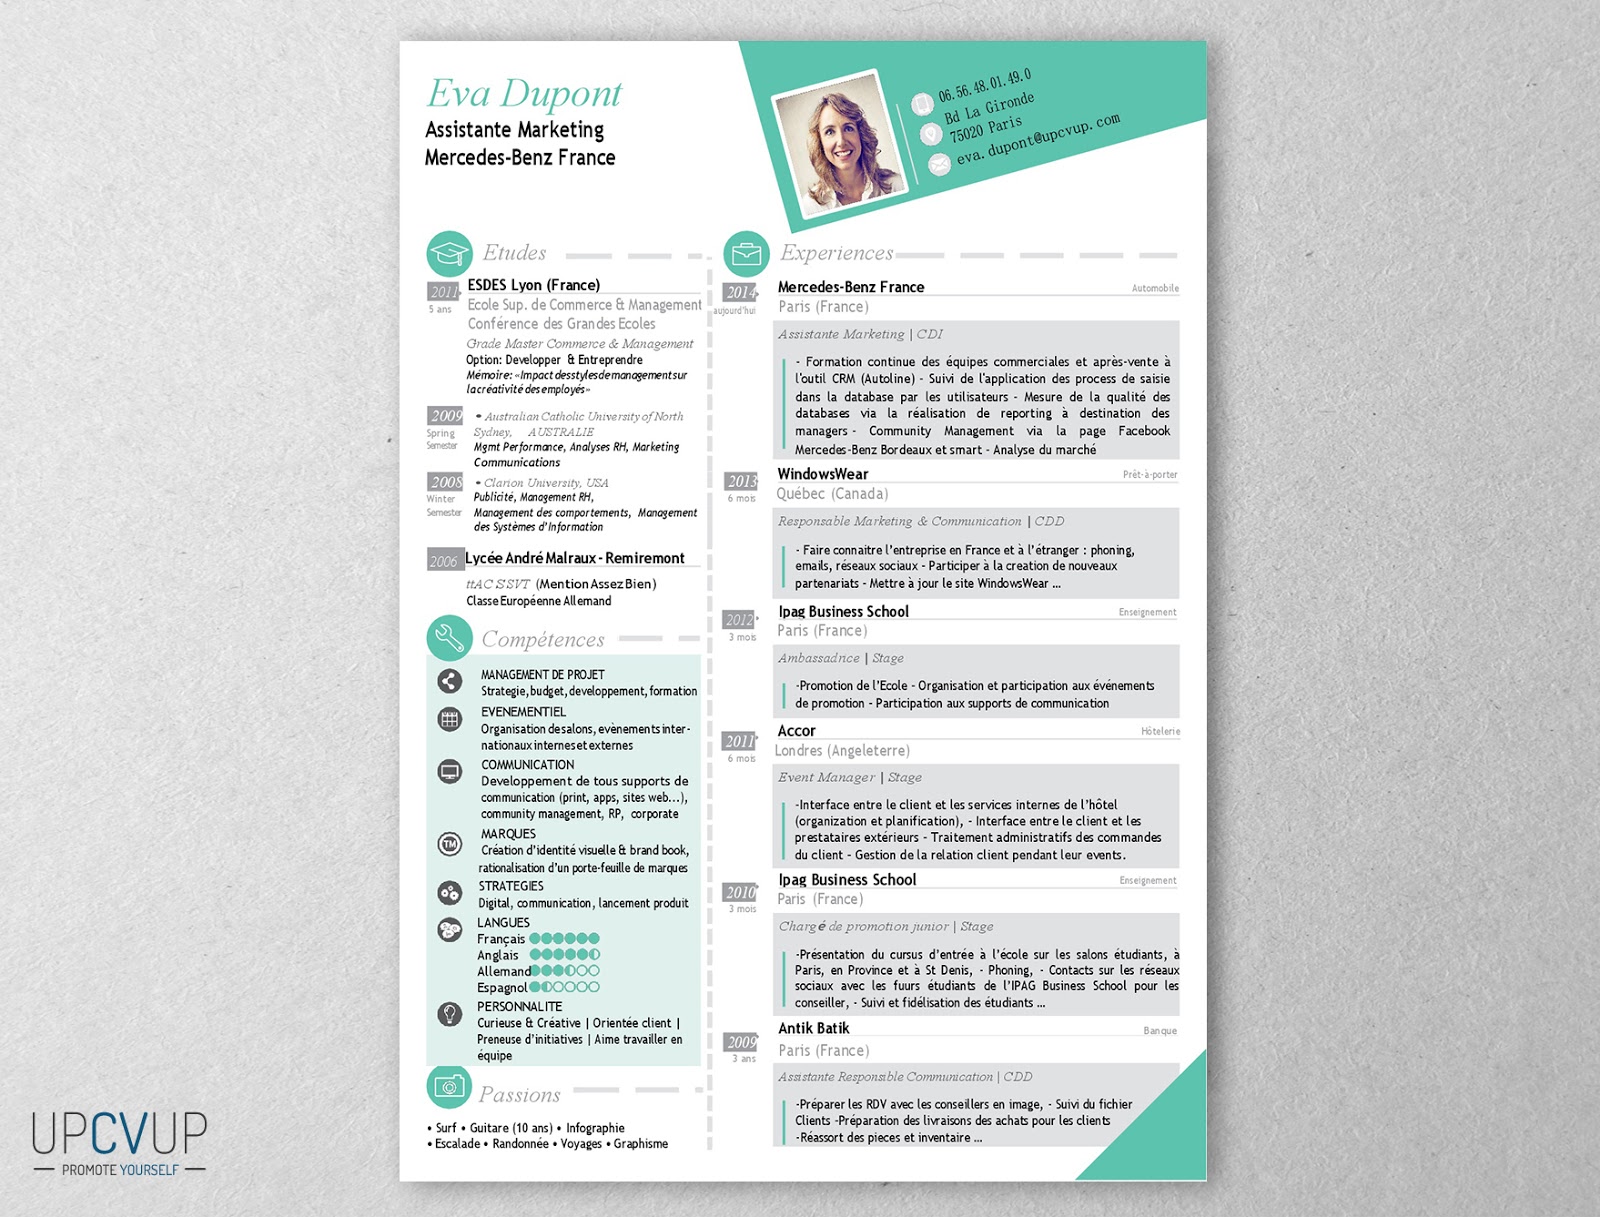 marketing assistant resume example, assistant marketing manager resume examples 2019, marketing assistant resume objective examples 2020, digital marketing assistant resume examples